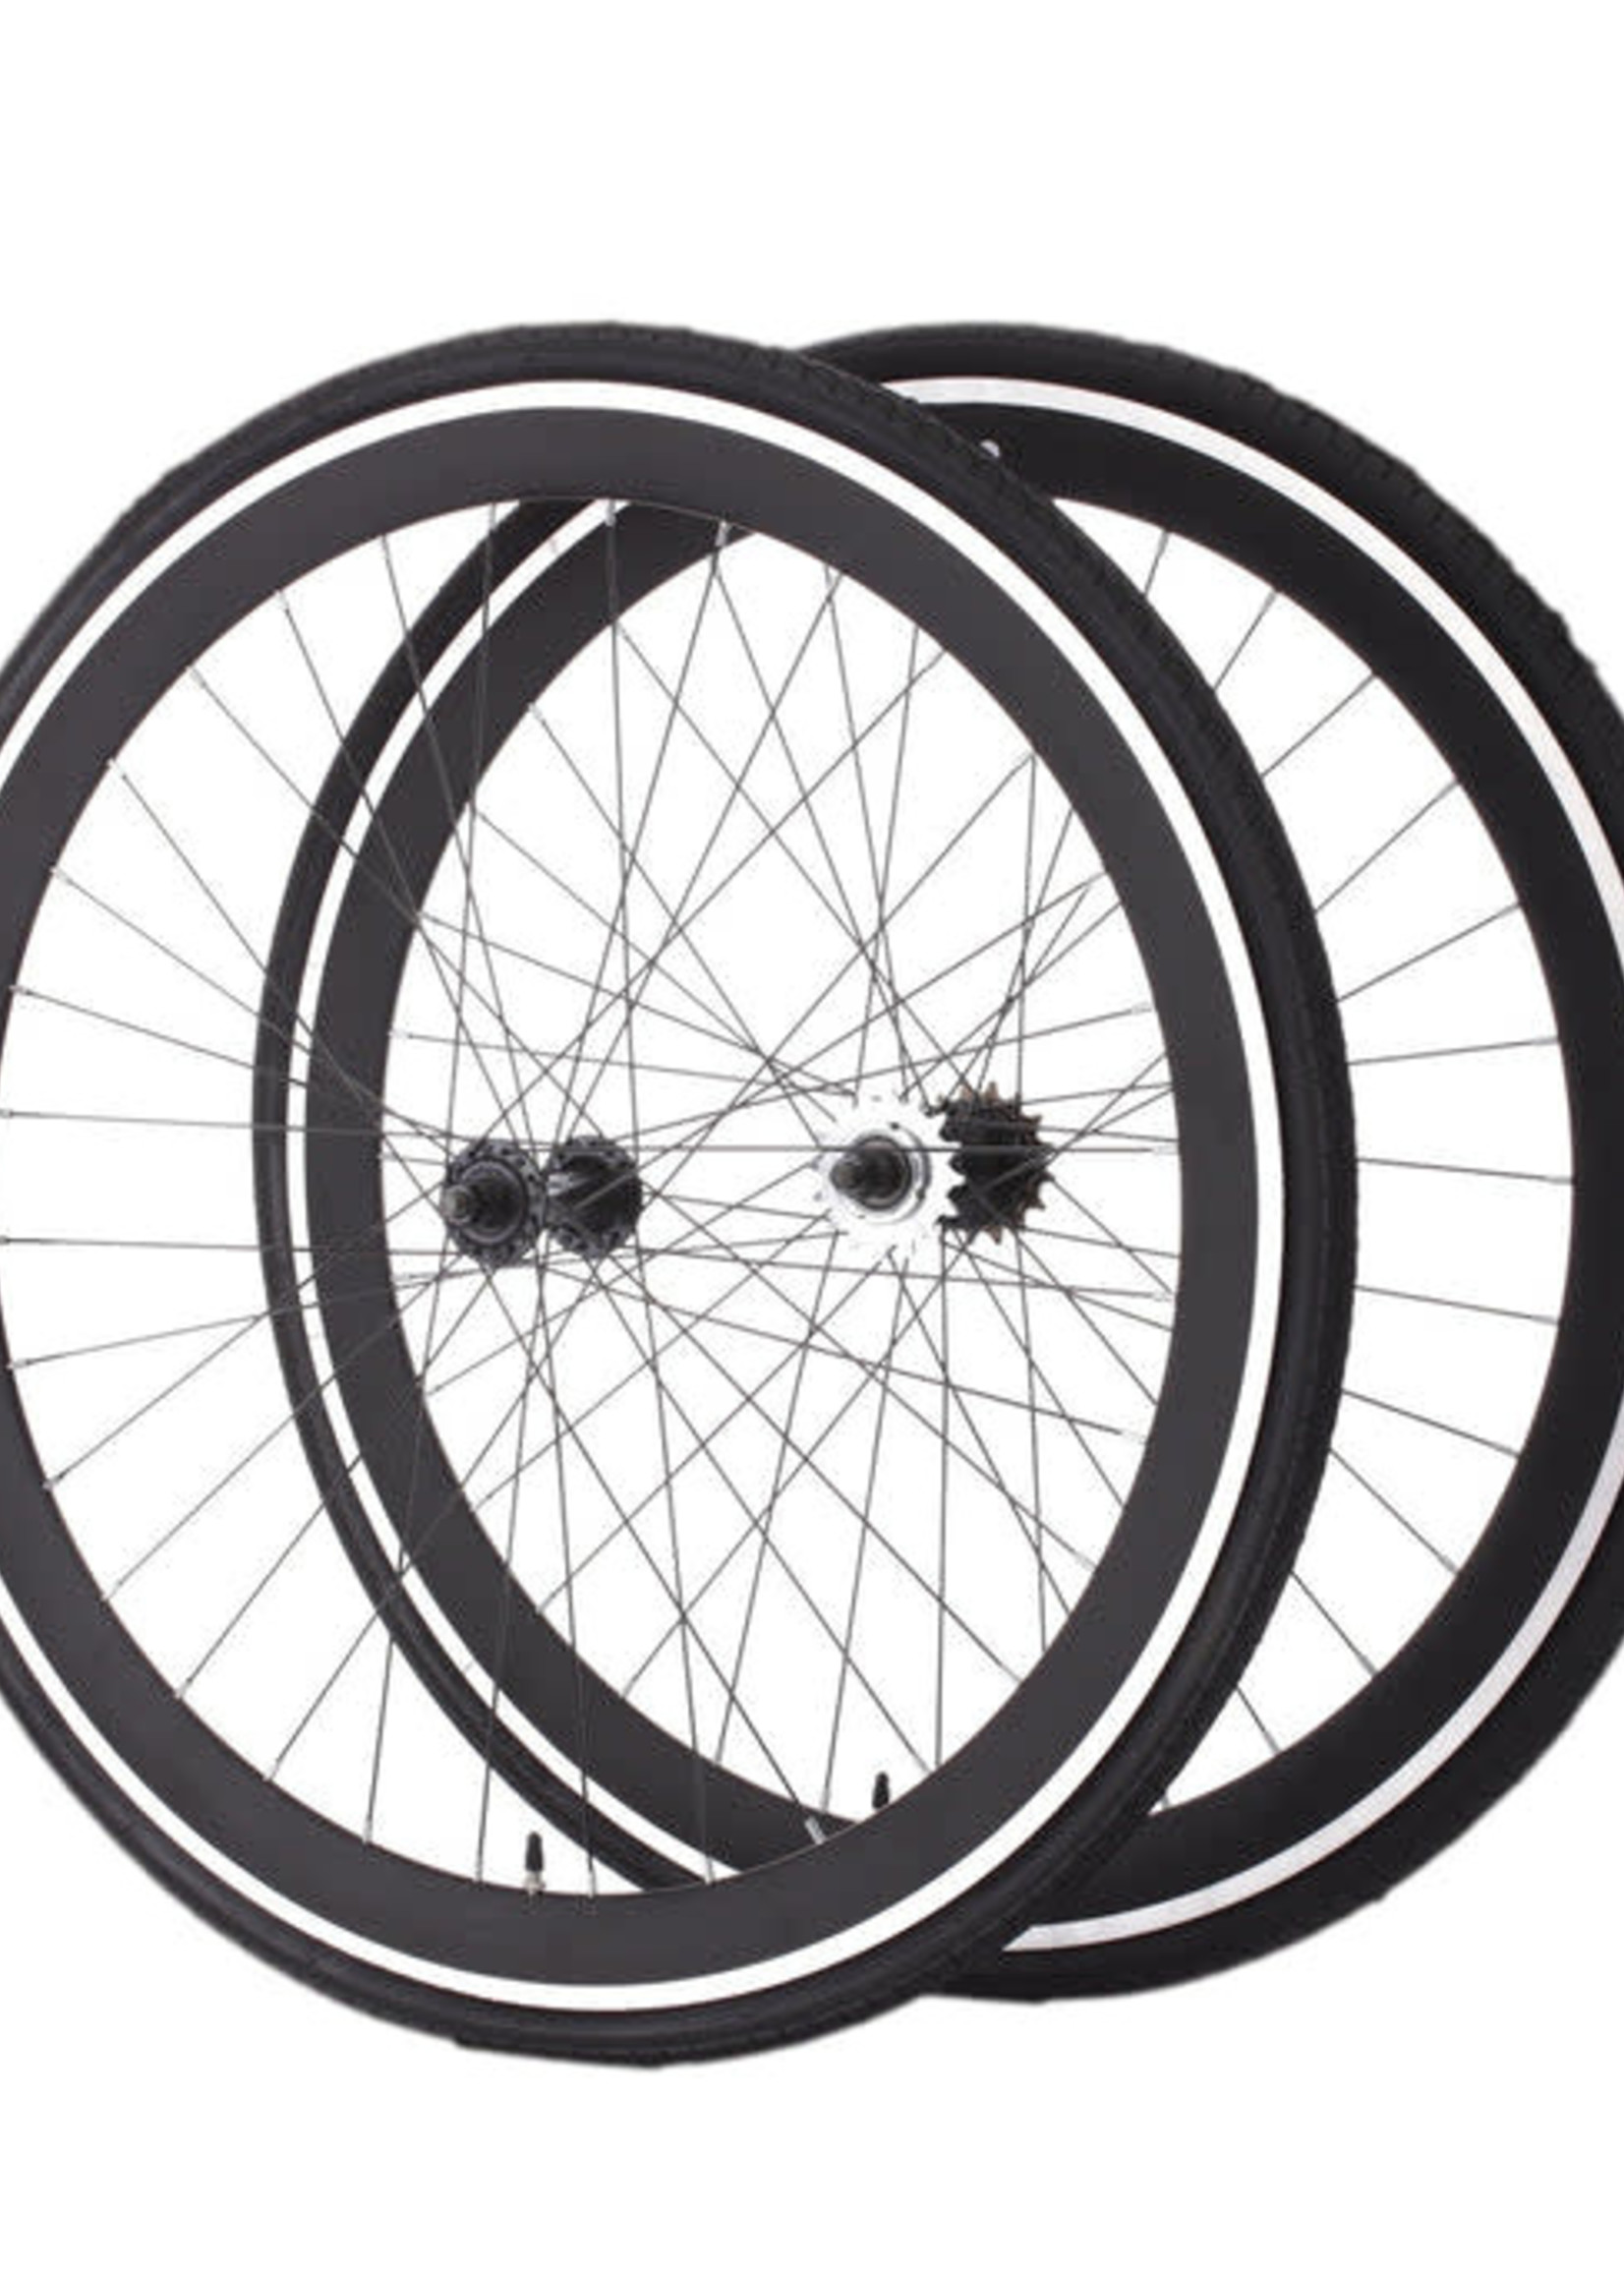 Wheelset Black (with Tire)